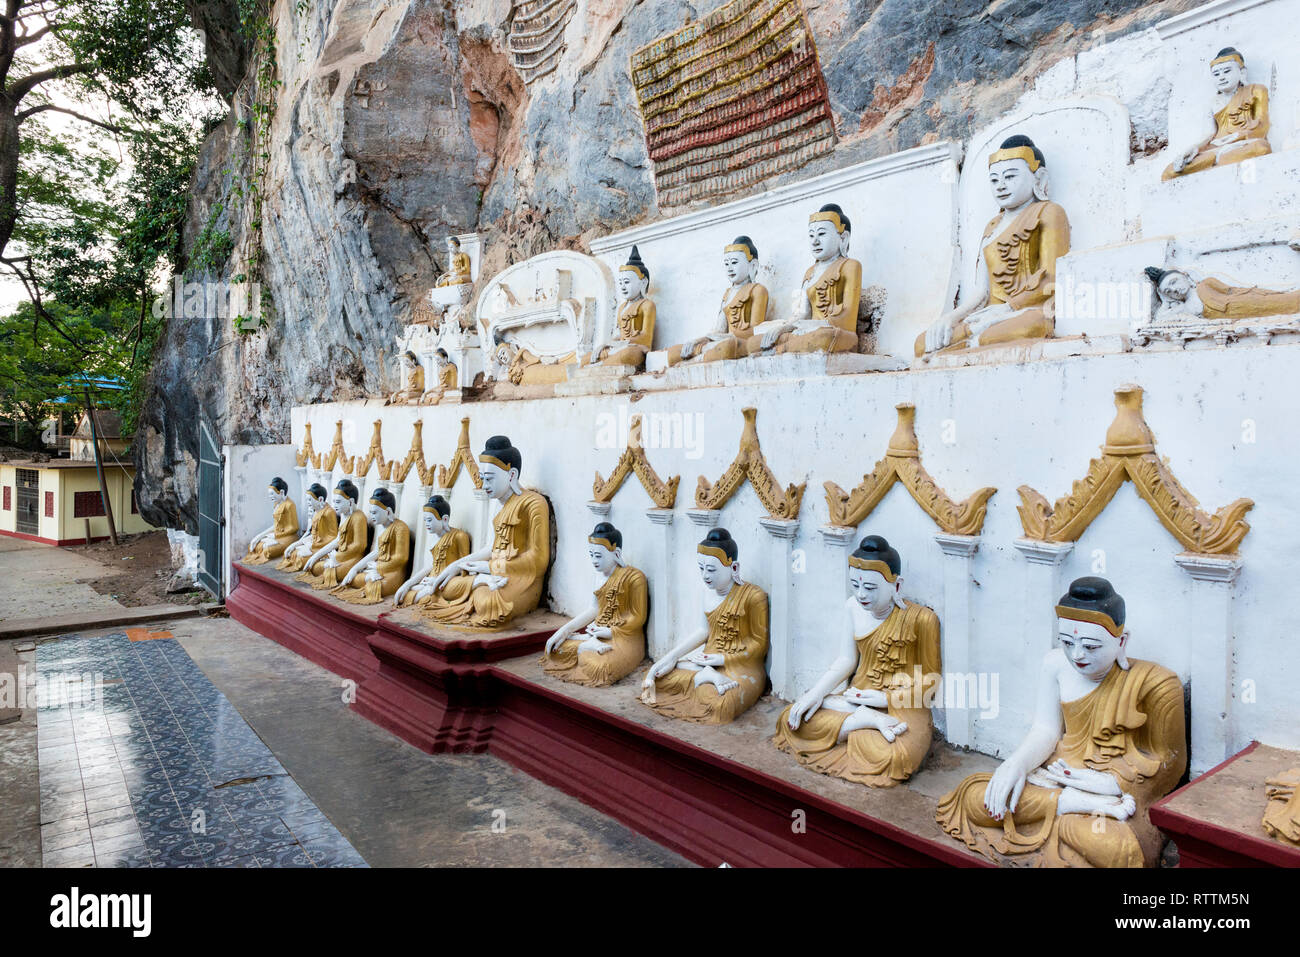 HPA-AN, MYANMAR - 19 NOVEMBER, 2018: Horizontal picture of the exterior of Kaw Goon Cave, landmark of Hpa-An, Myanmar Stock Photo